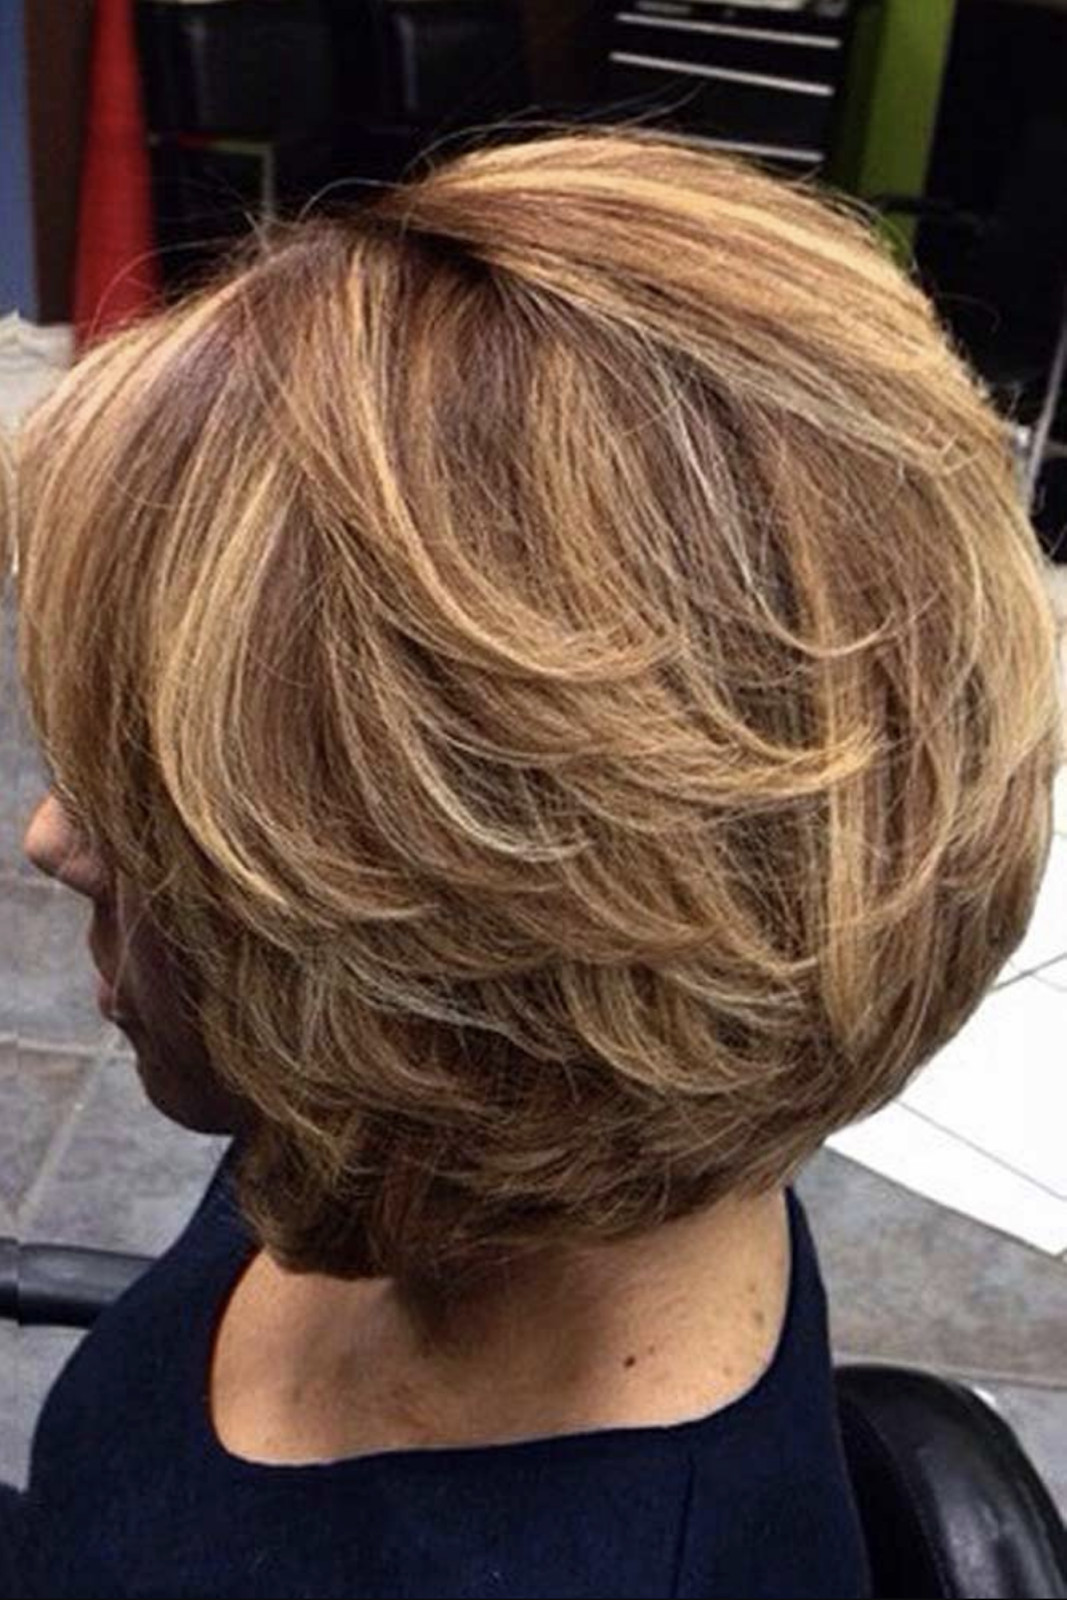 2020 Hairstyles For Medium Hair
 2019 2020 Short Hairstyles for Women Over 50 That Are